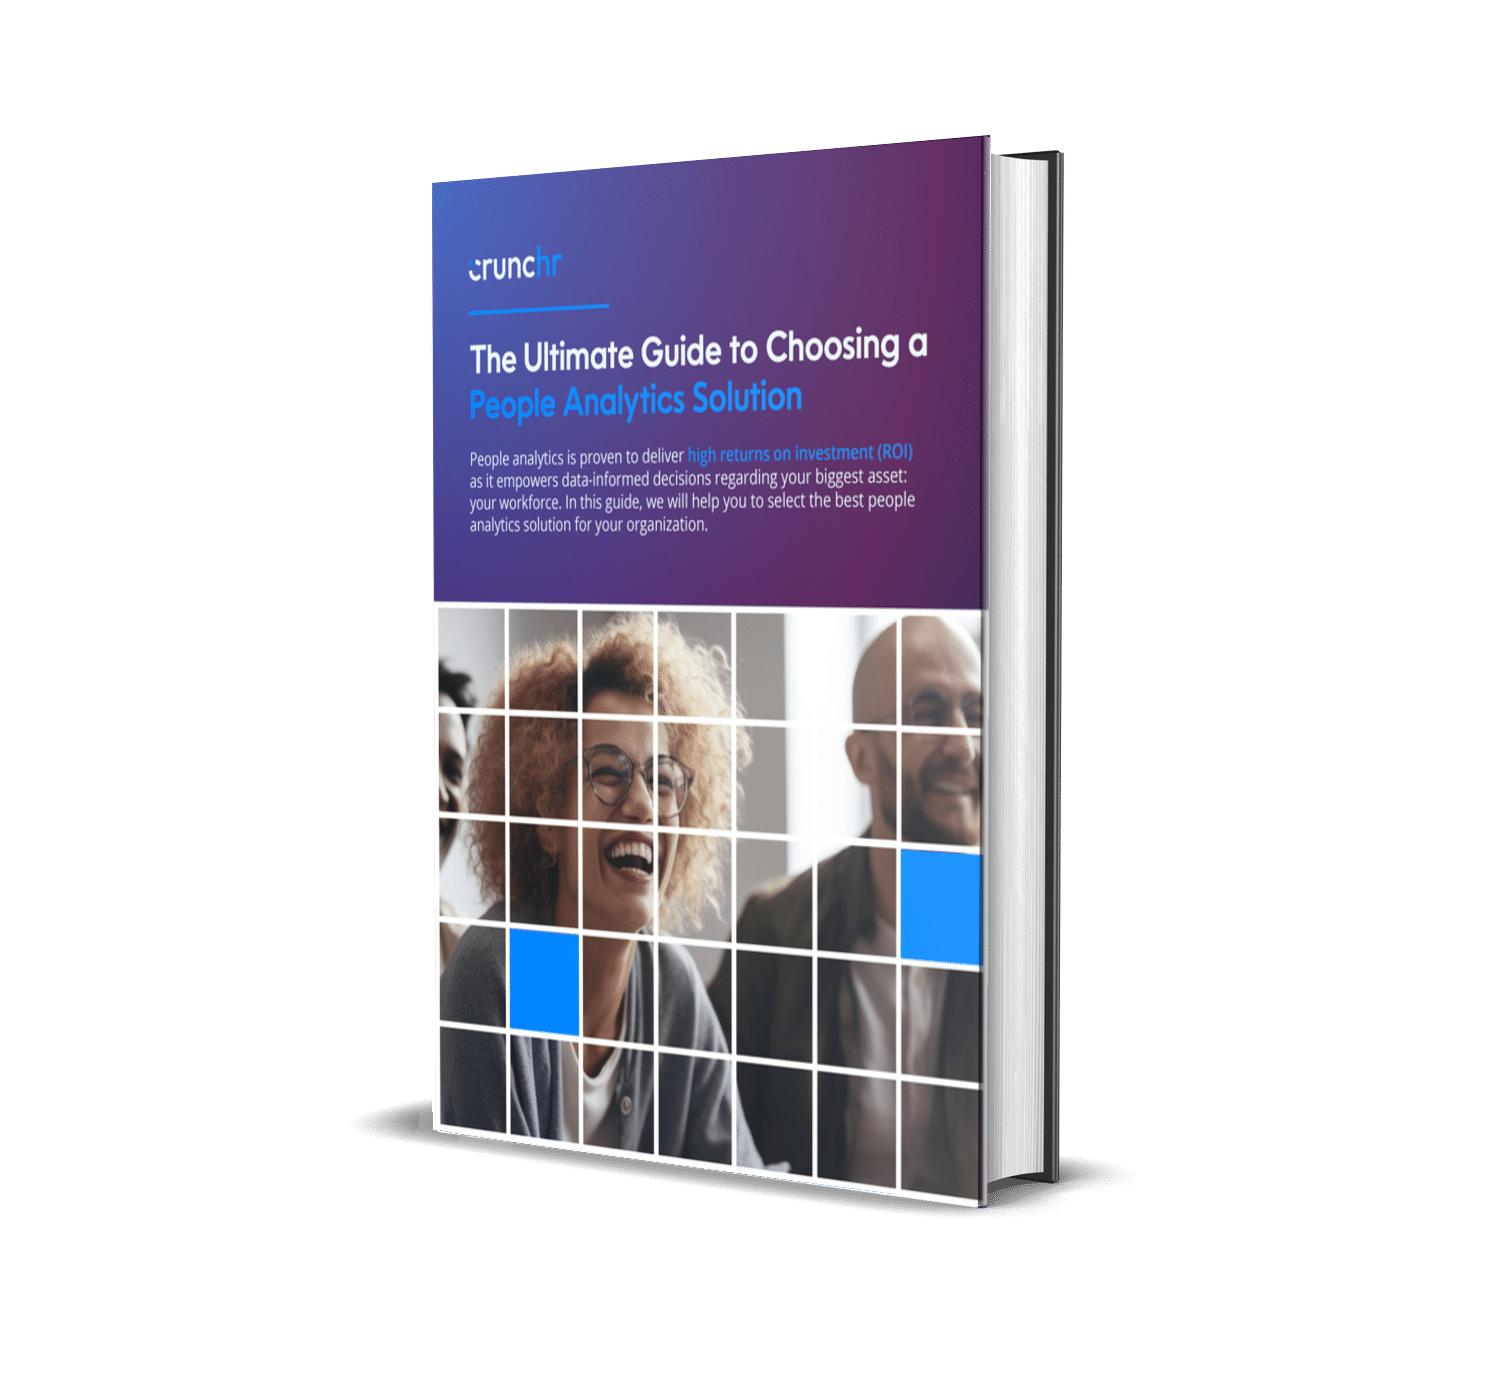 The Ultimate Guide to Choosing a People Analytics Solution book cover